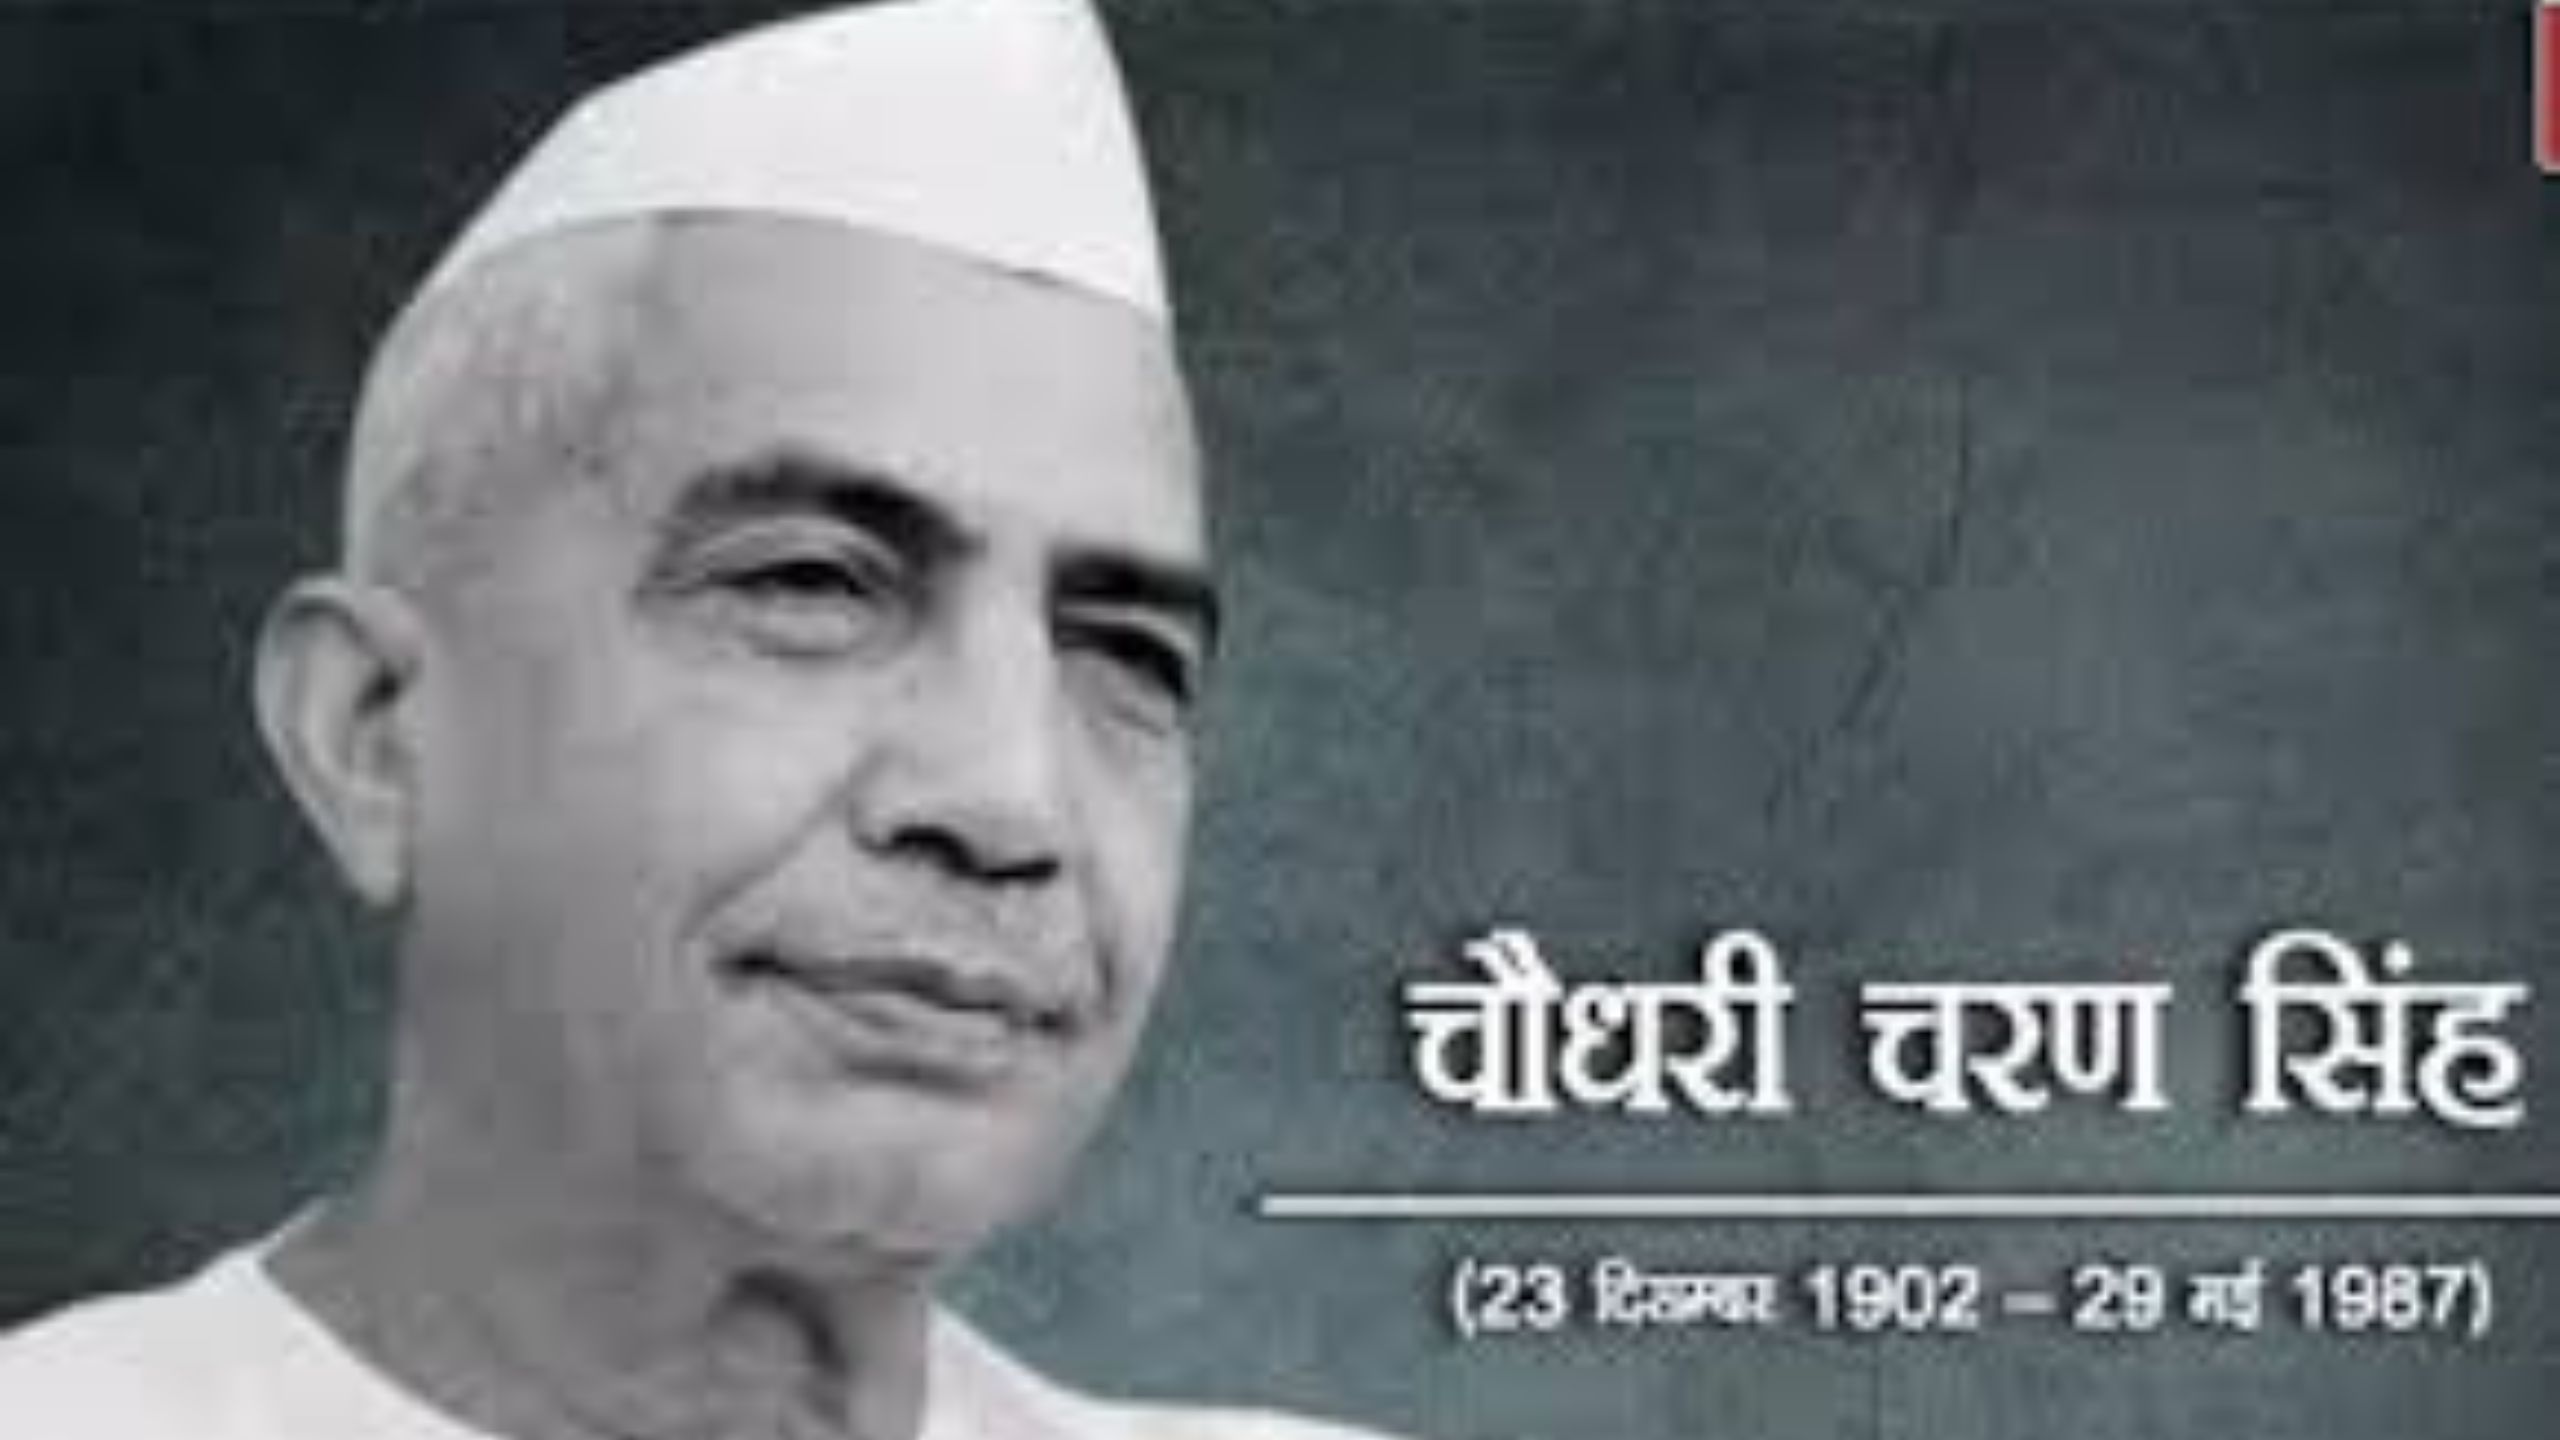 Kisan Diwas is celebrated every year to honor the work done by the former Prime Minister Chaudhry Charan singh for the farmers.